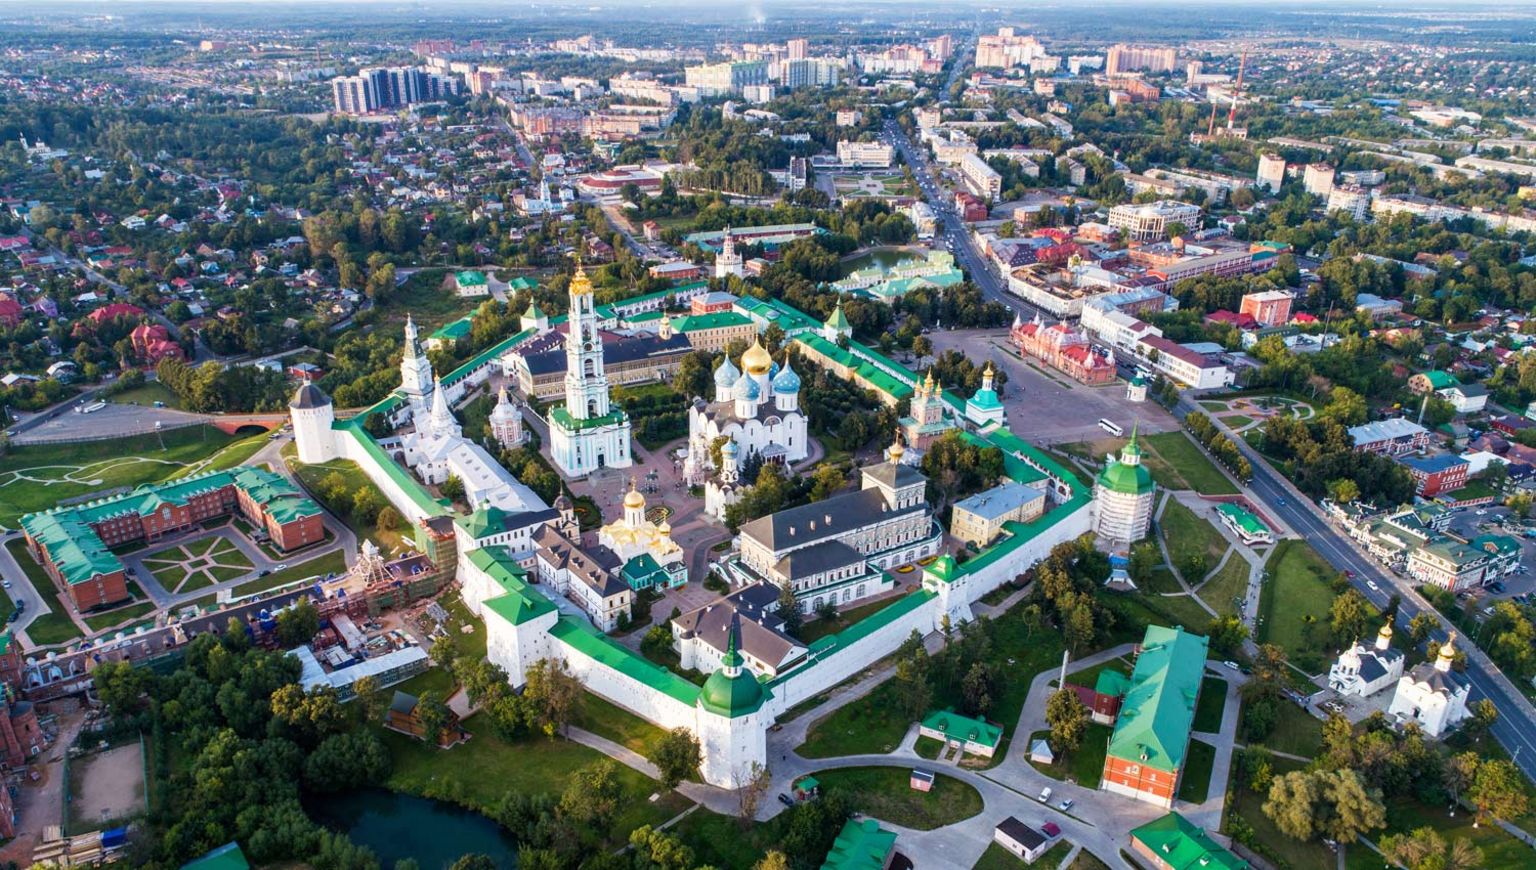 The town of Sergiev Posad is home to the spiritual centre of the Russian Orthodox Church - the Trinity Lavra of St Sergius